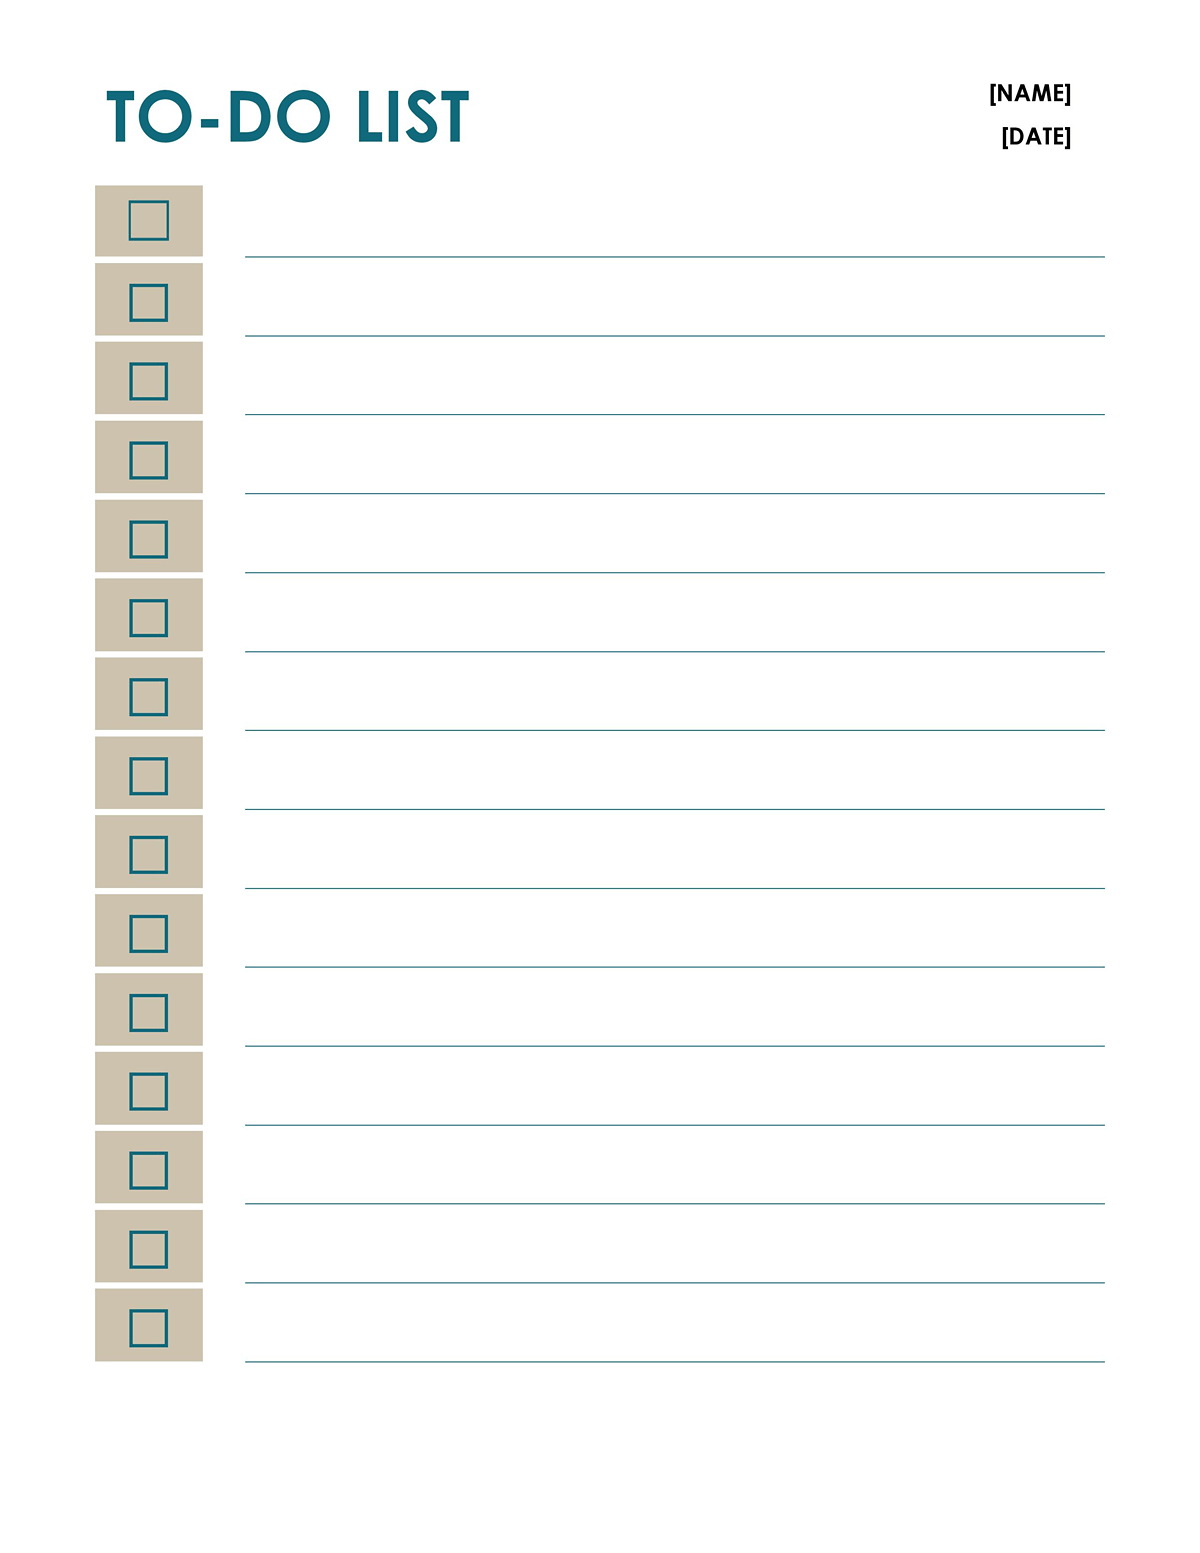 Word Document To Do List - Free Download